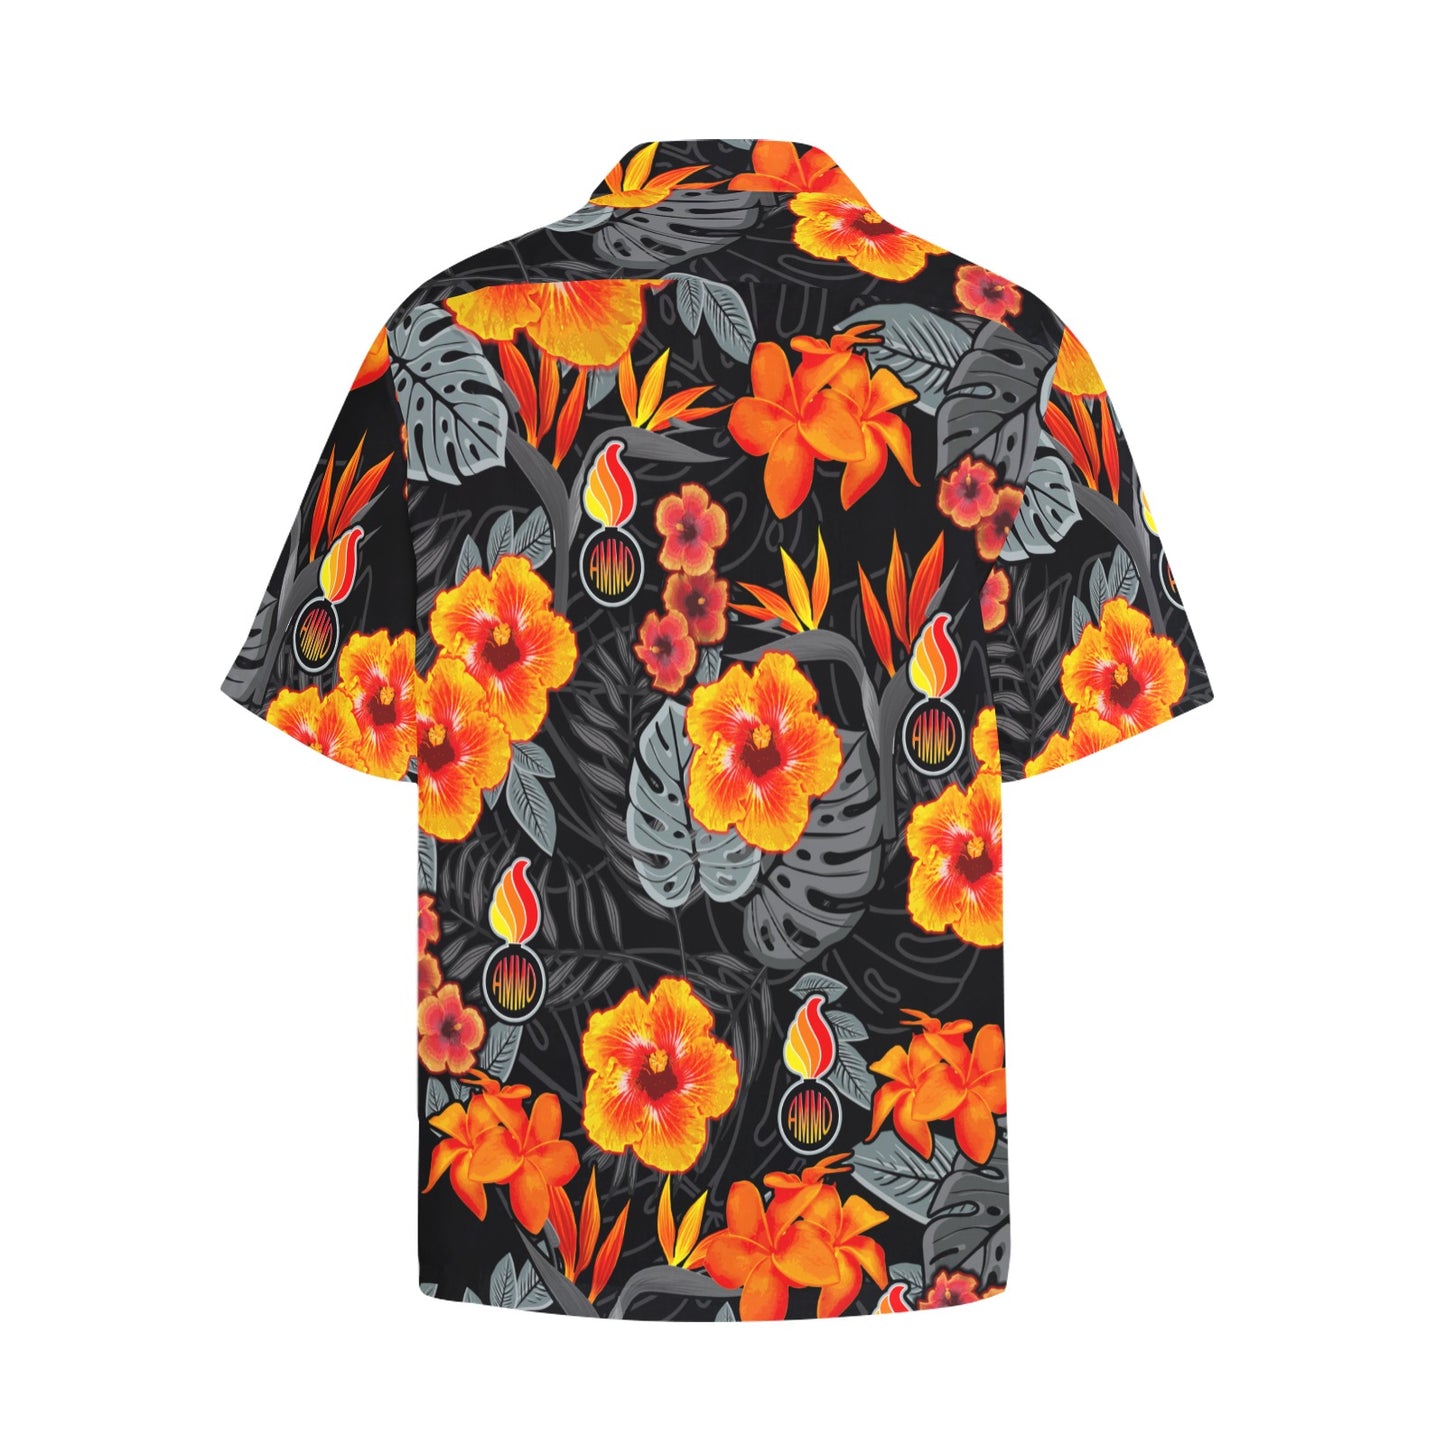 USAF AMMO Fire Orange Hibiscus Flowers Leaves Pisspots AMMO Hawaiian Shirt With Left Chest Pocket